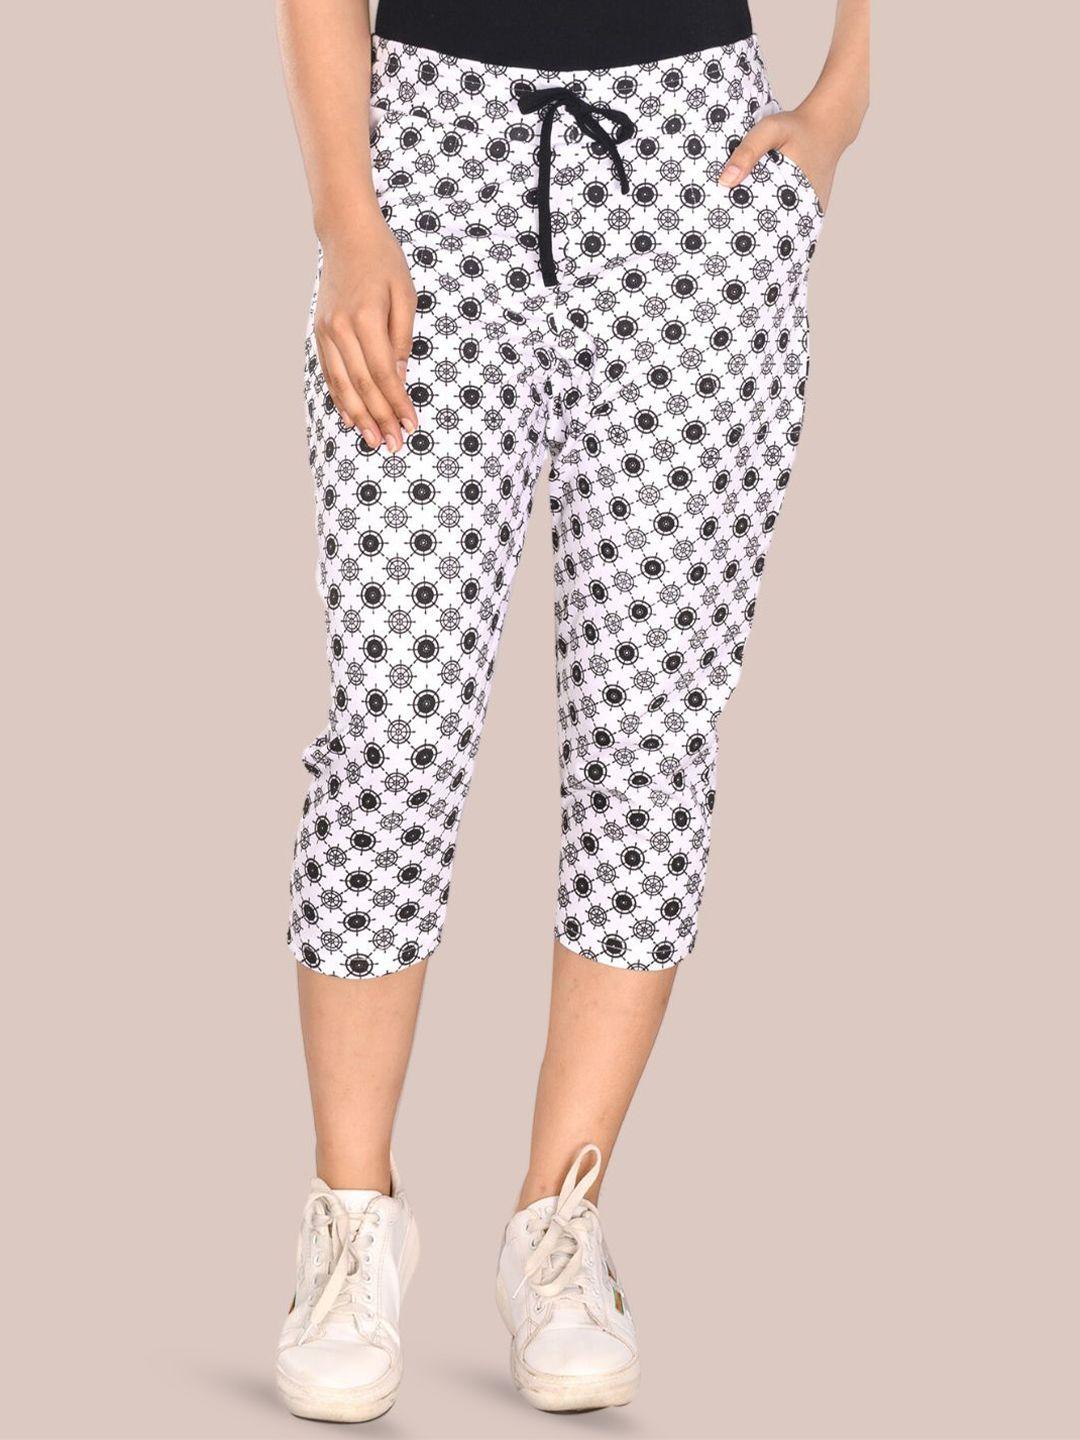 styleaone printed cotton capris